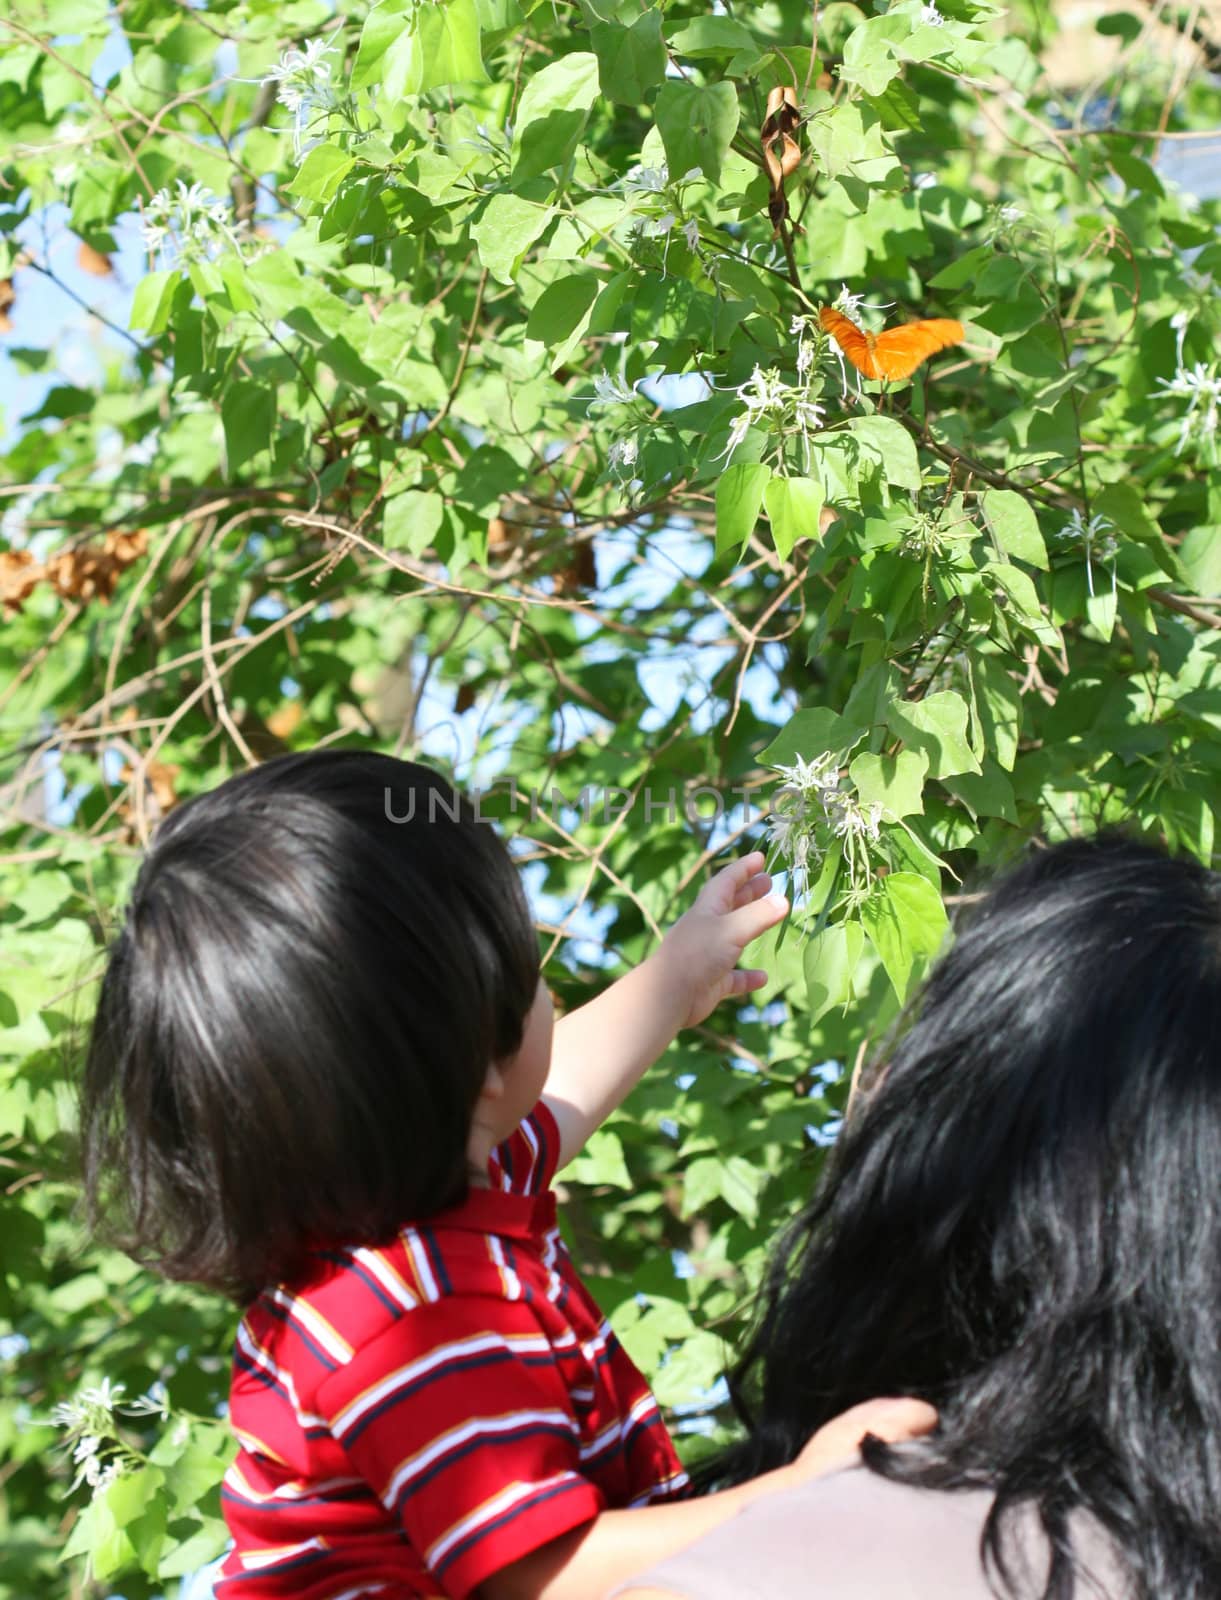 A young boy reaches out to touch a Julia Longwing Butterfly on a tree